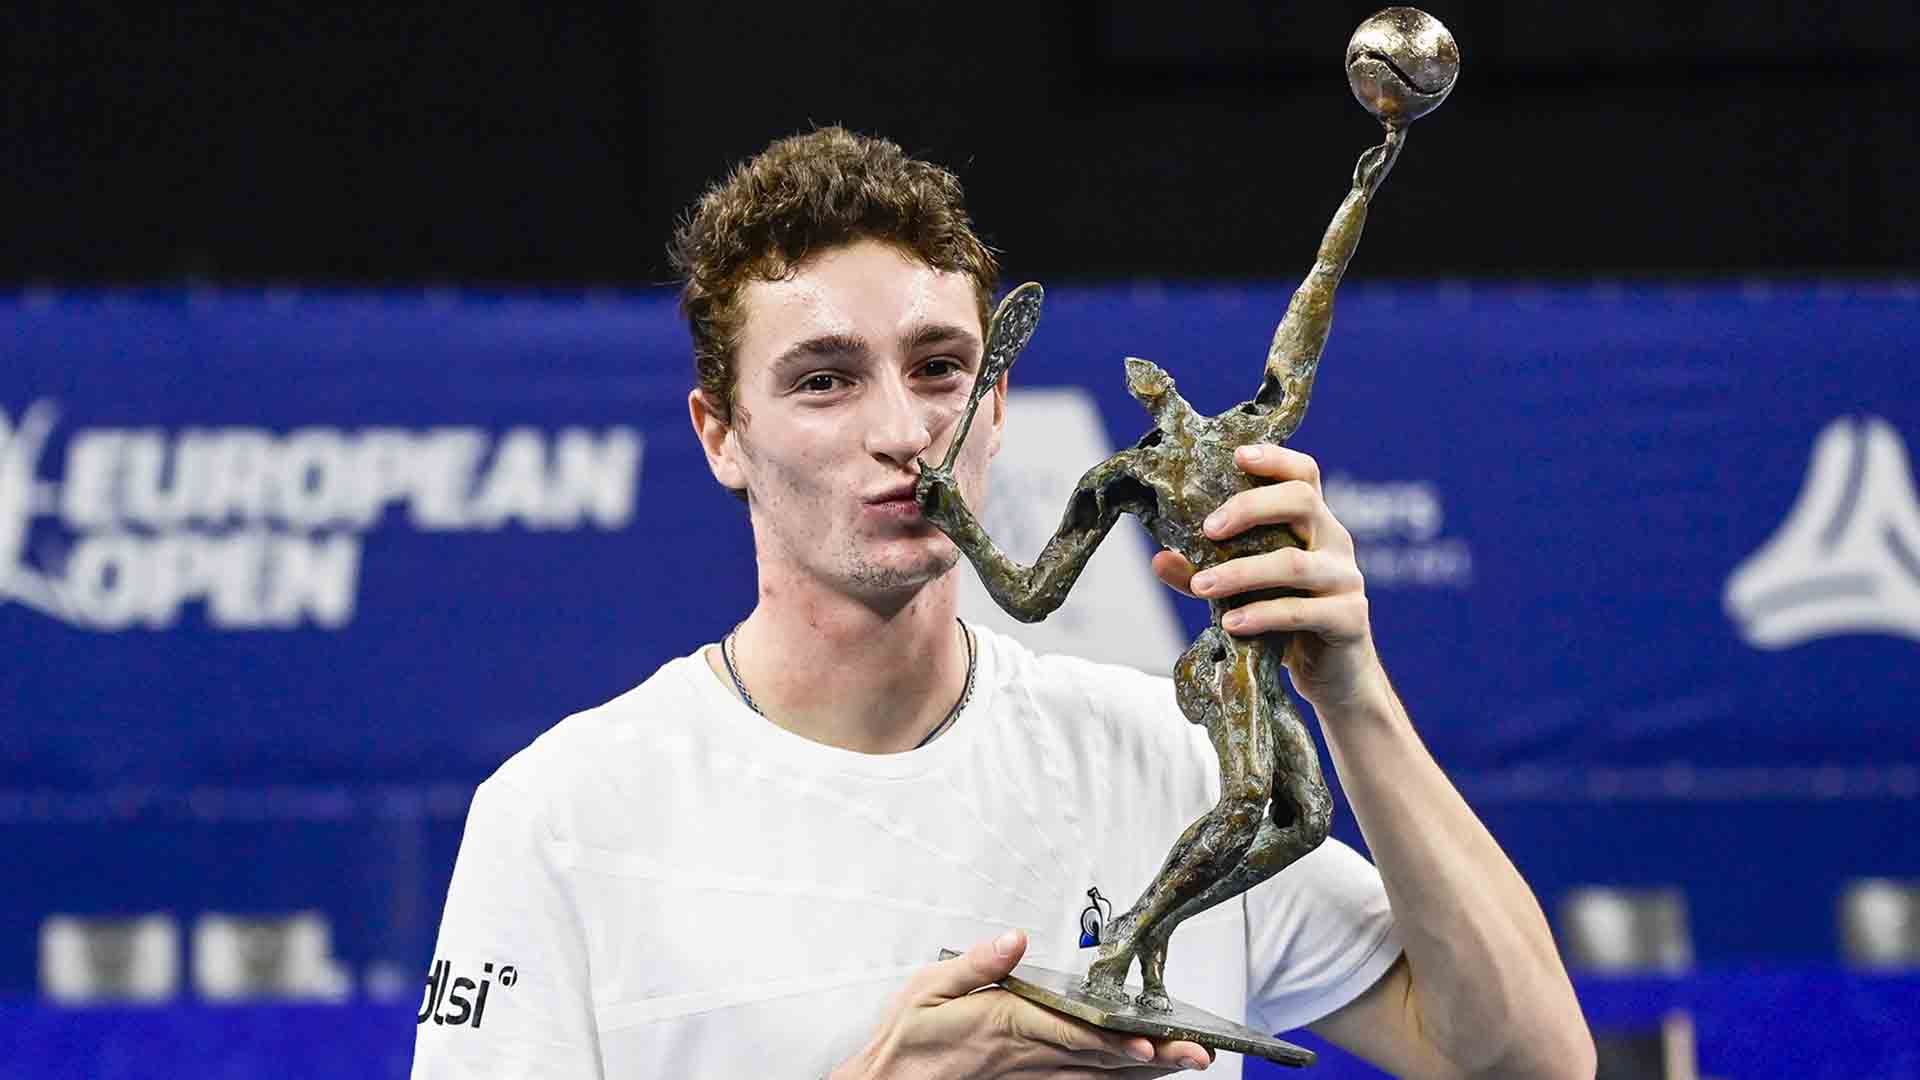 Ugo Humbert owns a 2-0 record in ATP Tour finals.